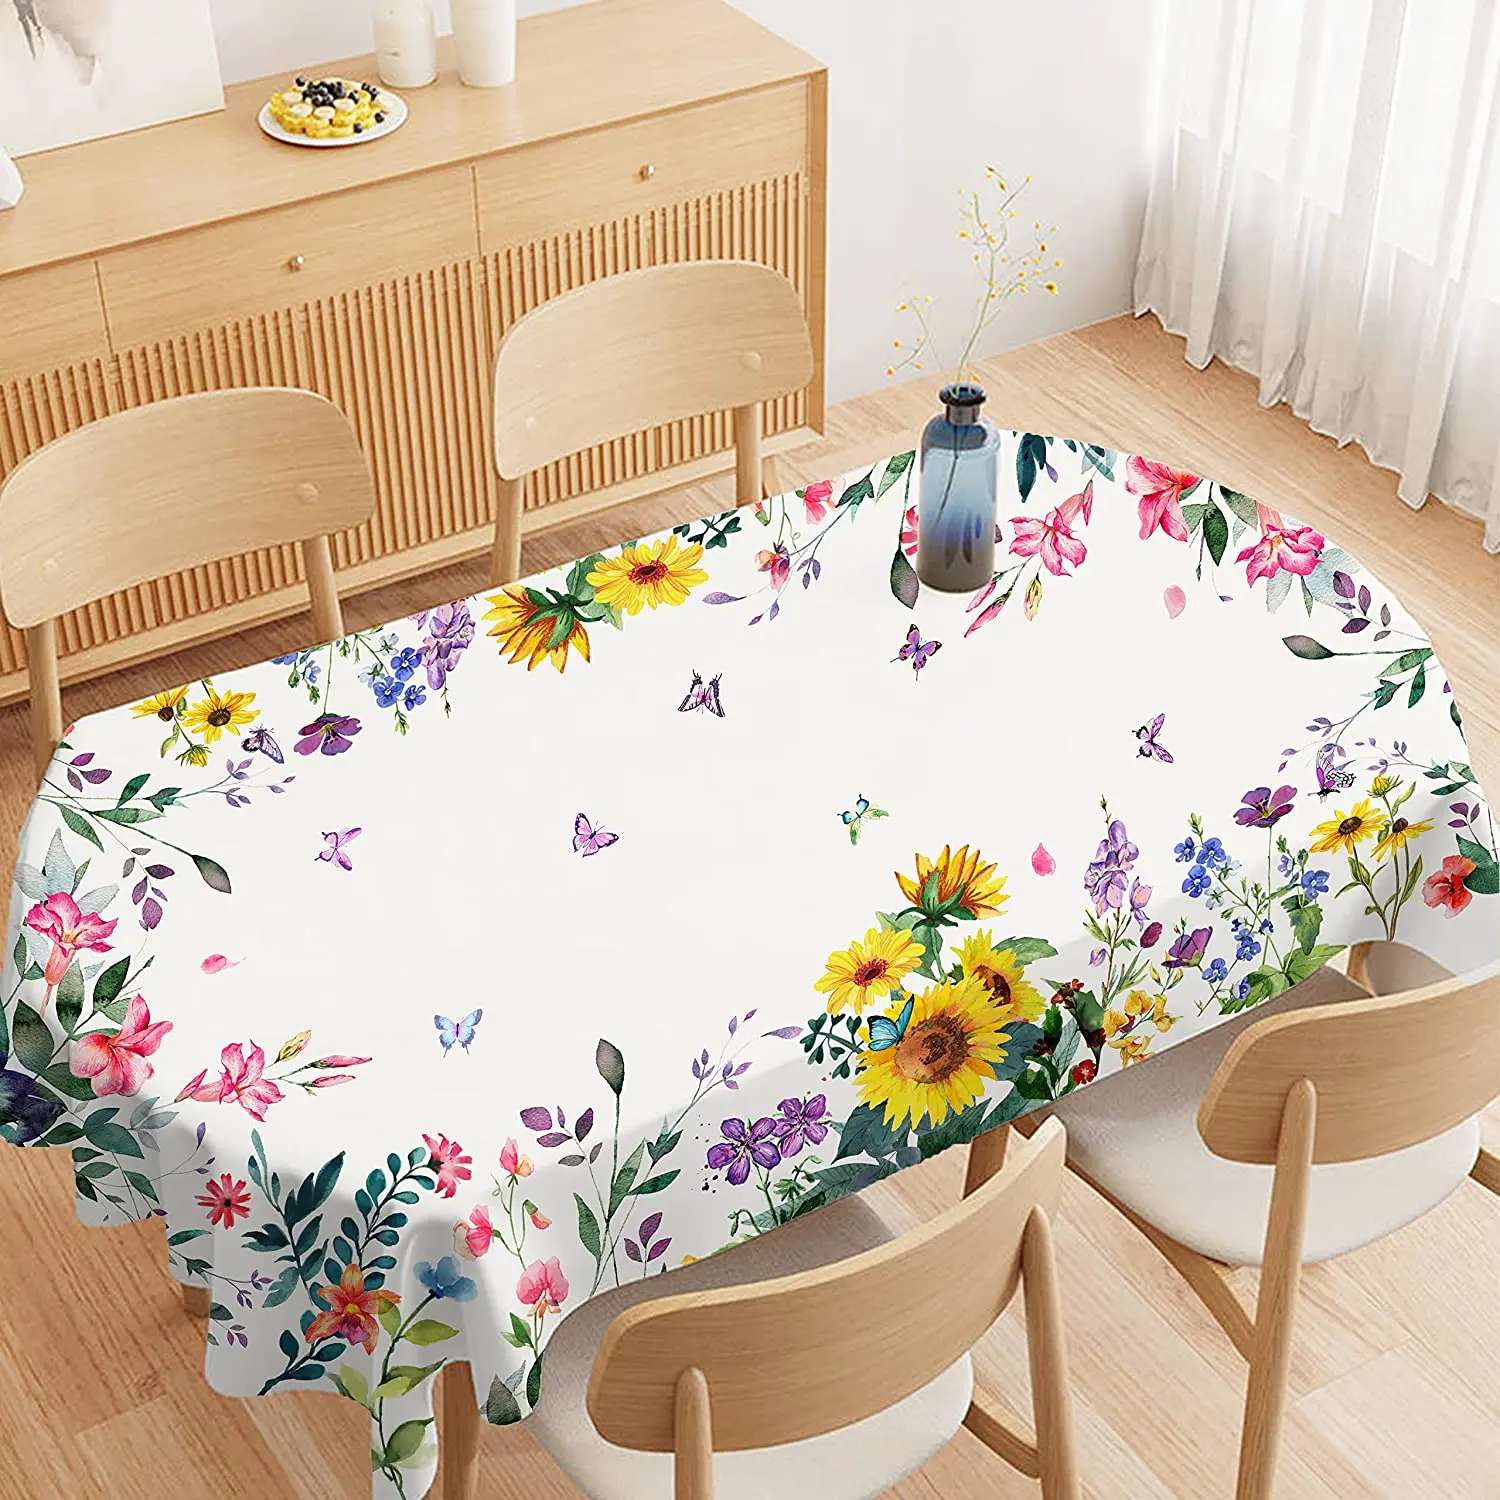 

Spring Floral Watercolor Rectangular Tablecloth Holiday Party Decorations Waterproof Tablecloth Kitchen Dining Wedding Decor